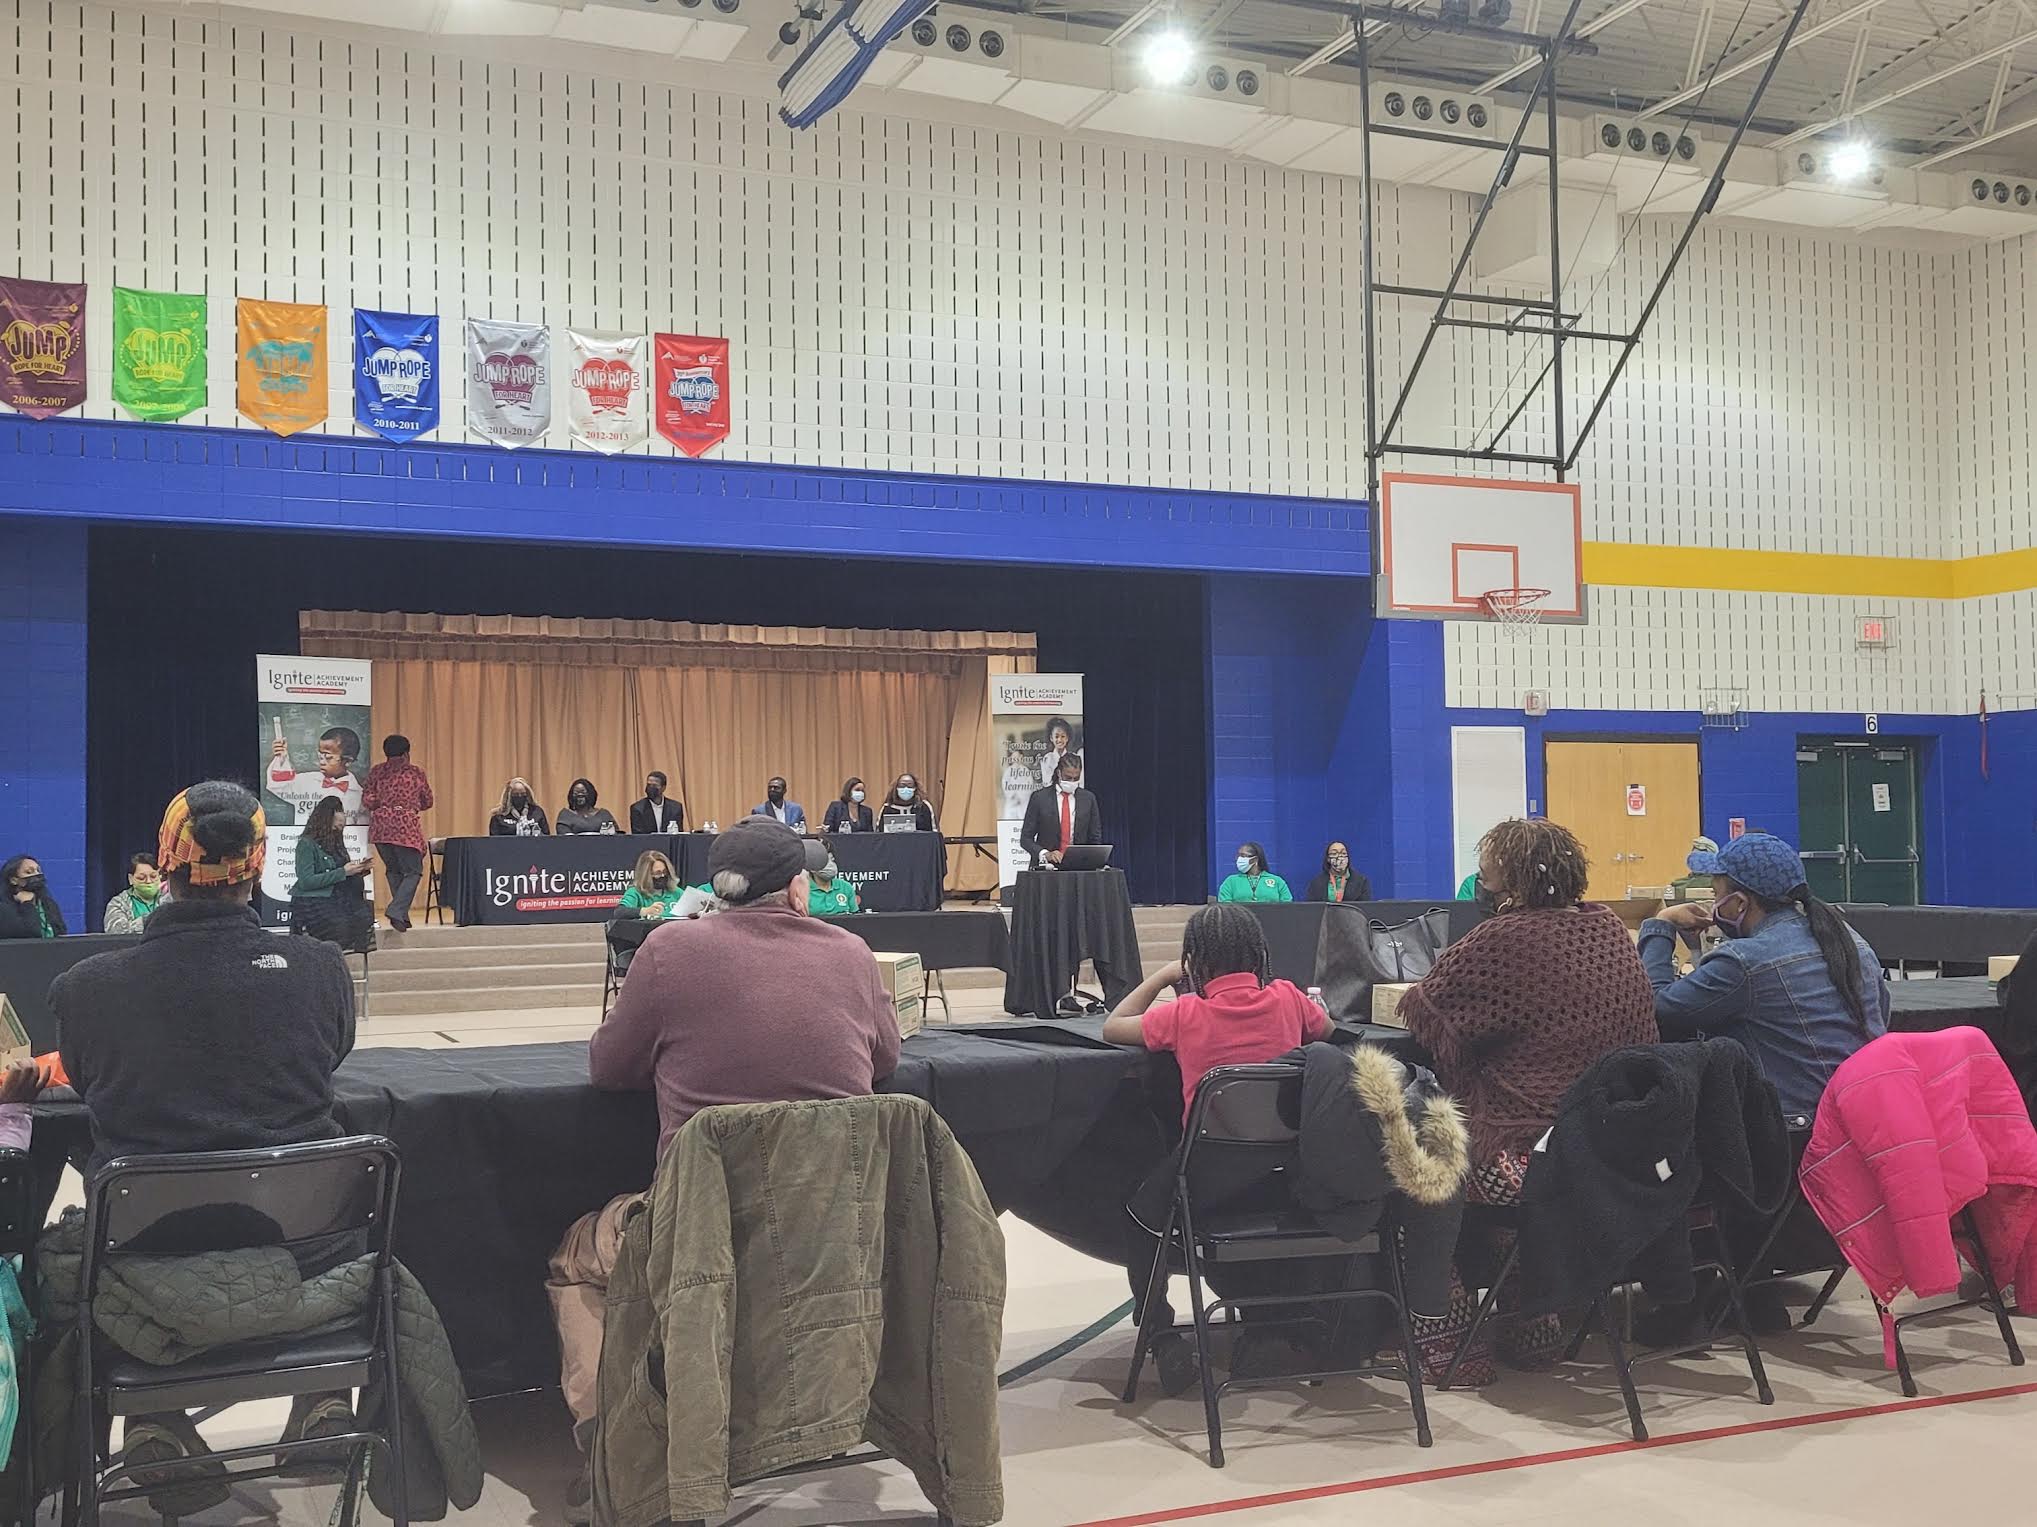 Four parents with their backs turned sit in a gym facing Ignite Achievement Academy co-founder Shy-Quon Ely as he gives a speech on the status of the school, with board members on a raised stage behind him.